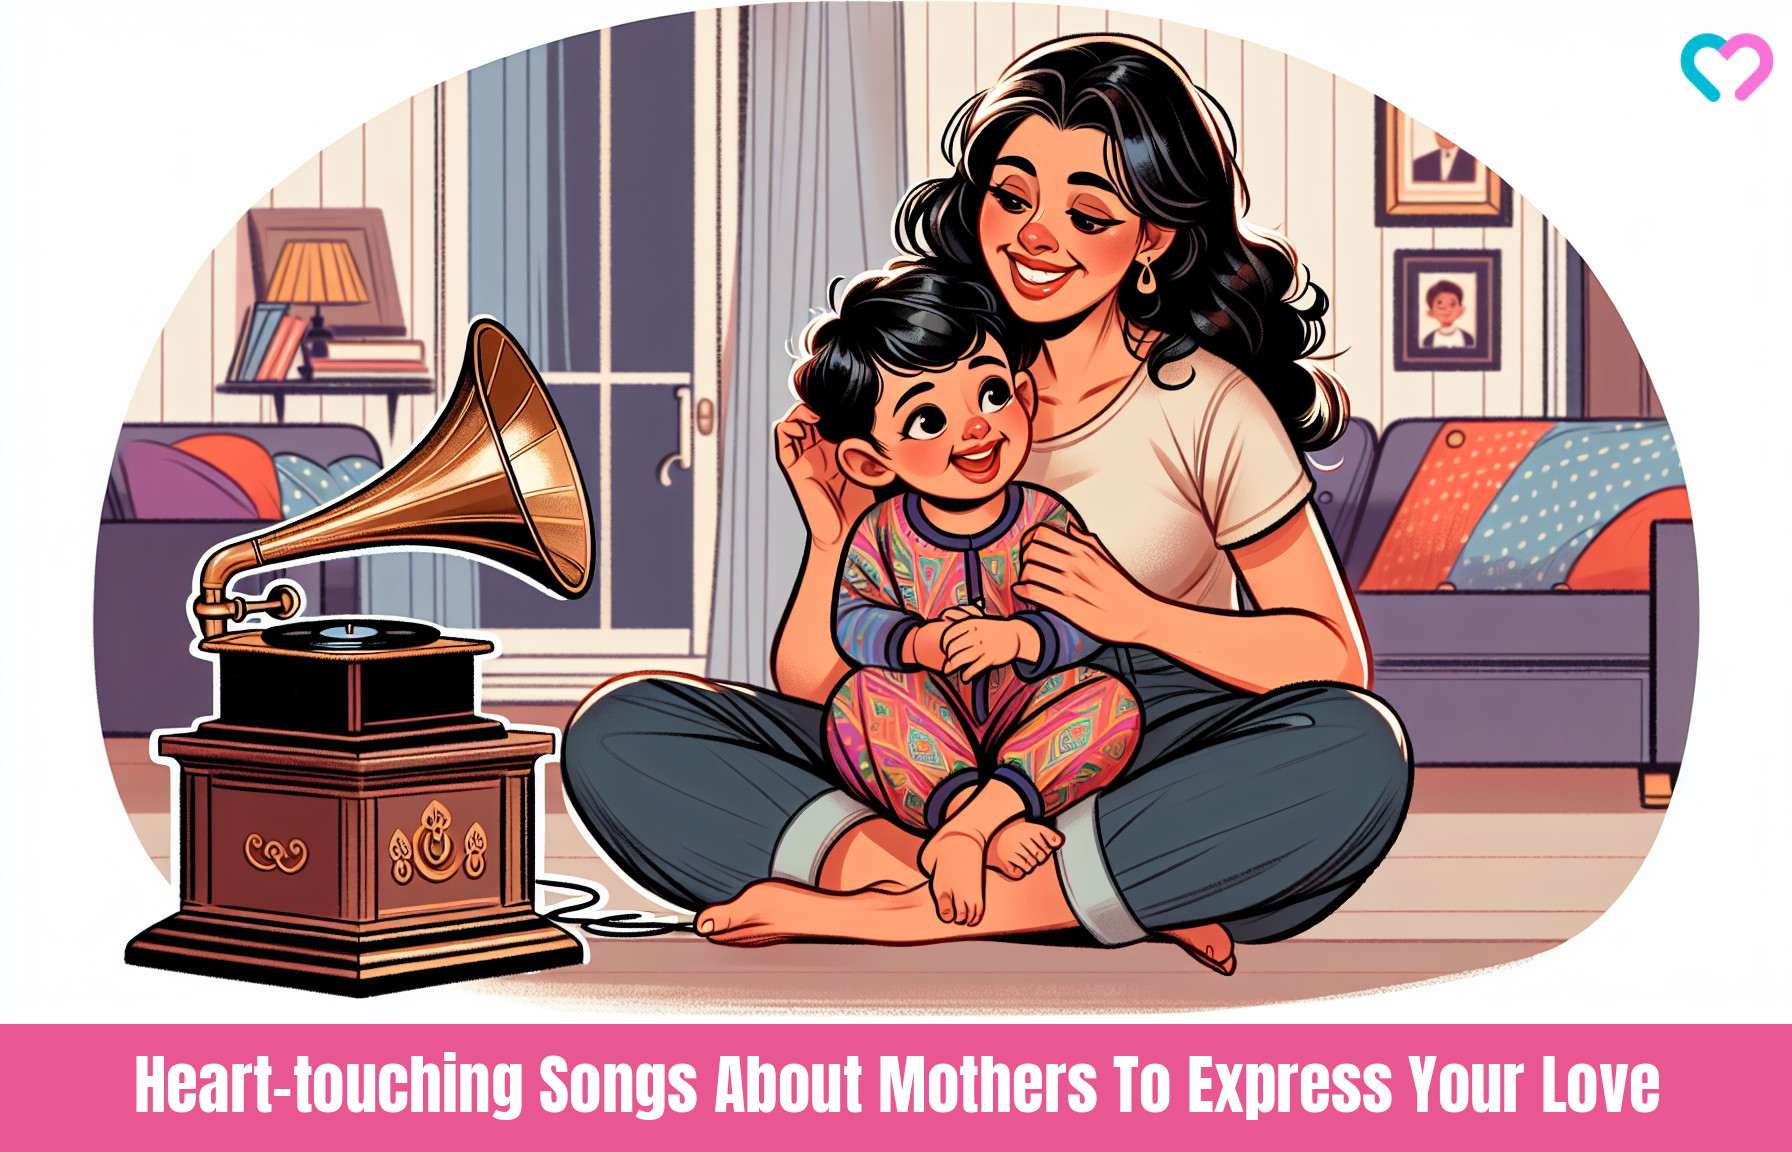 song about mothers_illustration